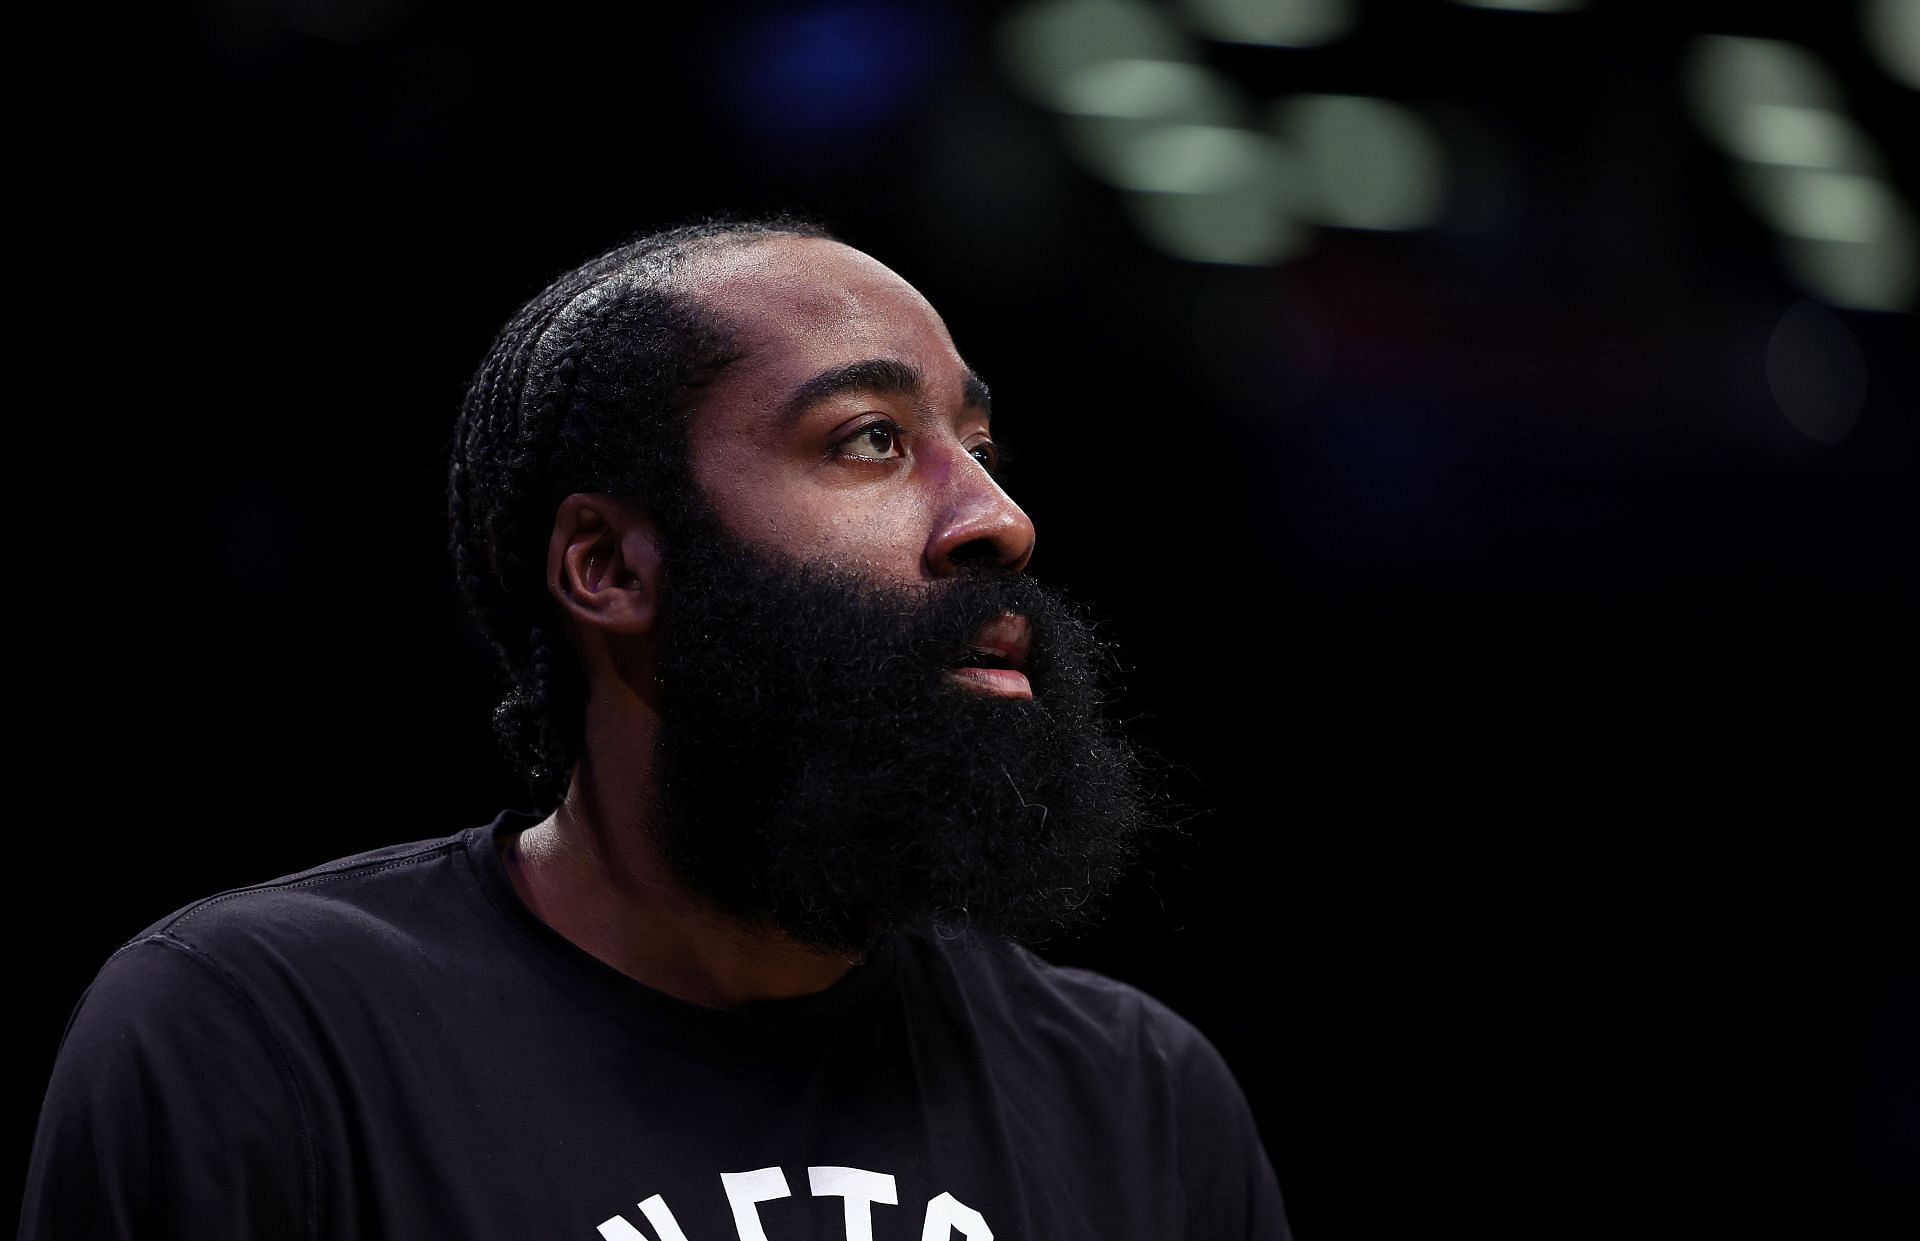 James Harden has been traded to the Philadelphia 76ers for Ben Simmons